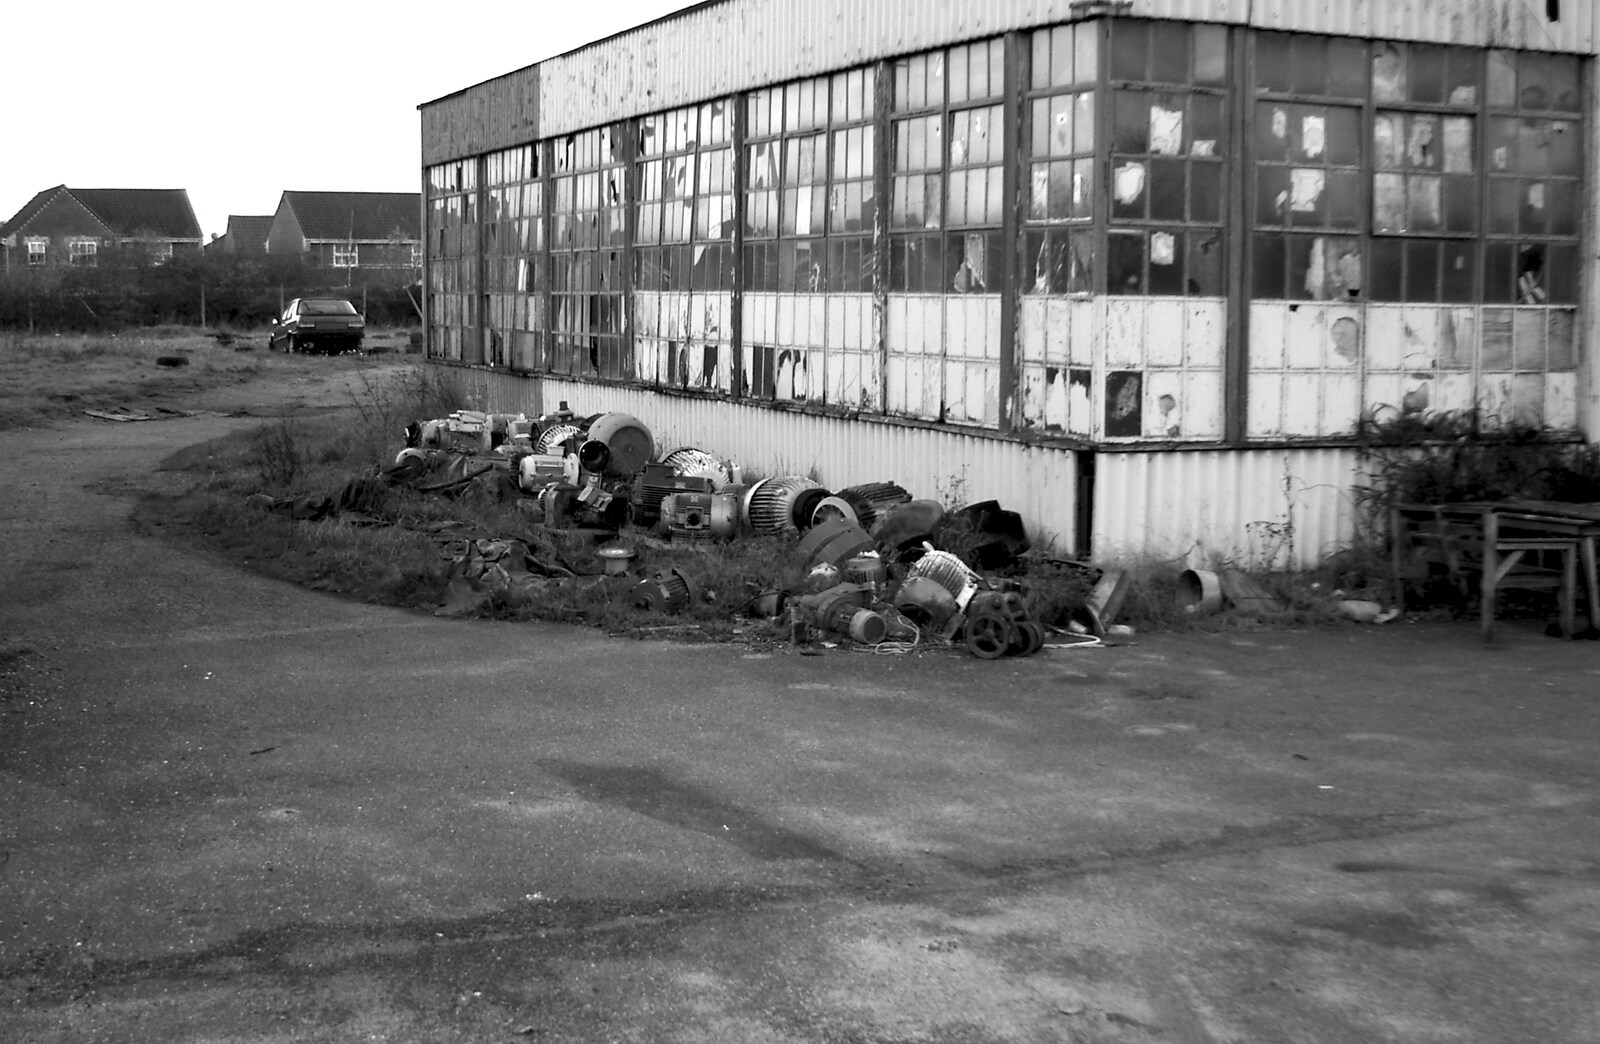 A pile of electric motors outside a derelict warehouse from Random Scenes of Diss, Norfolk - 20th November 2004